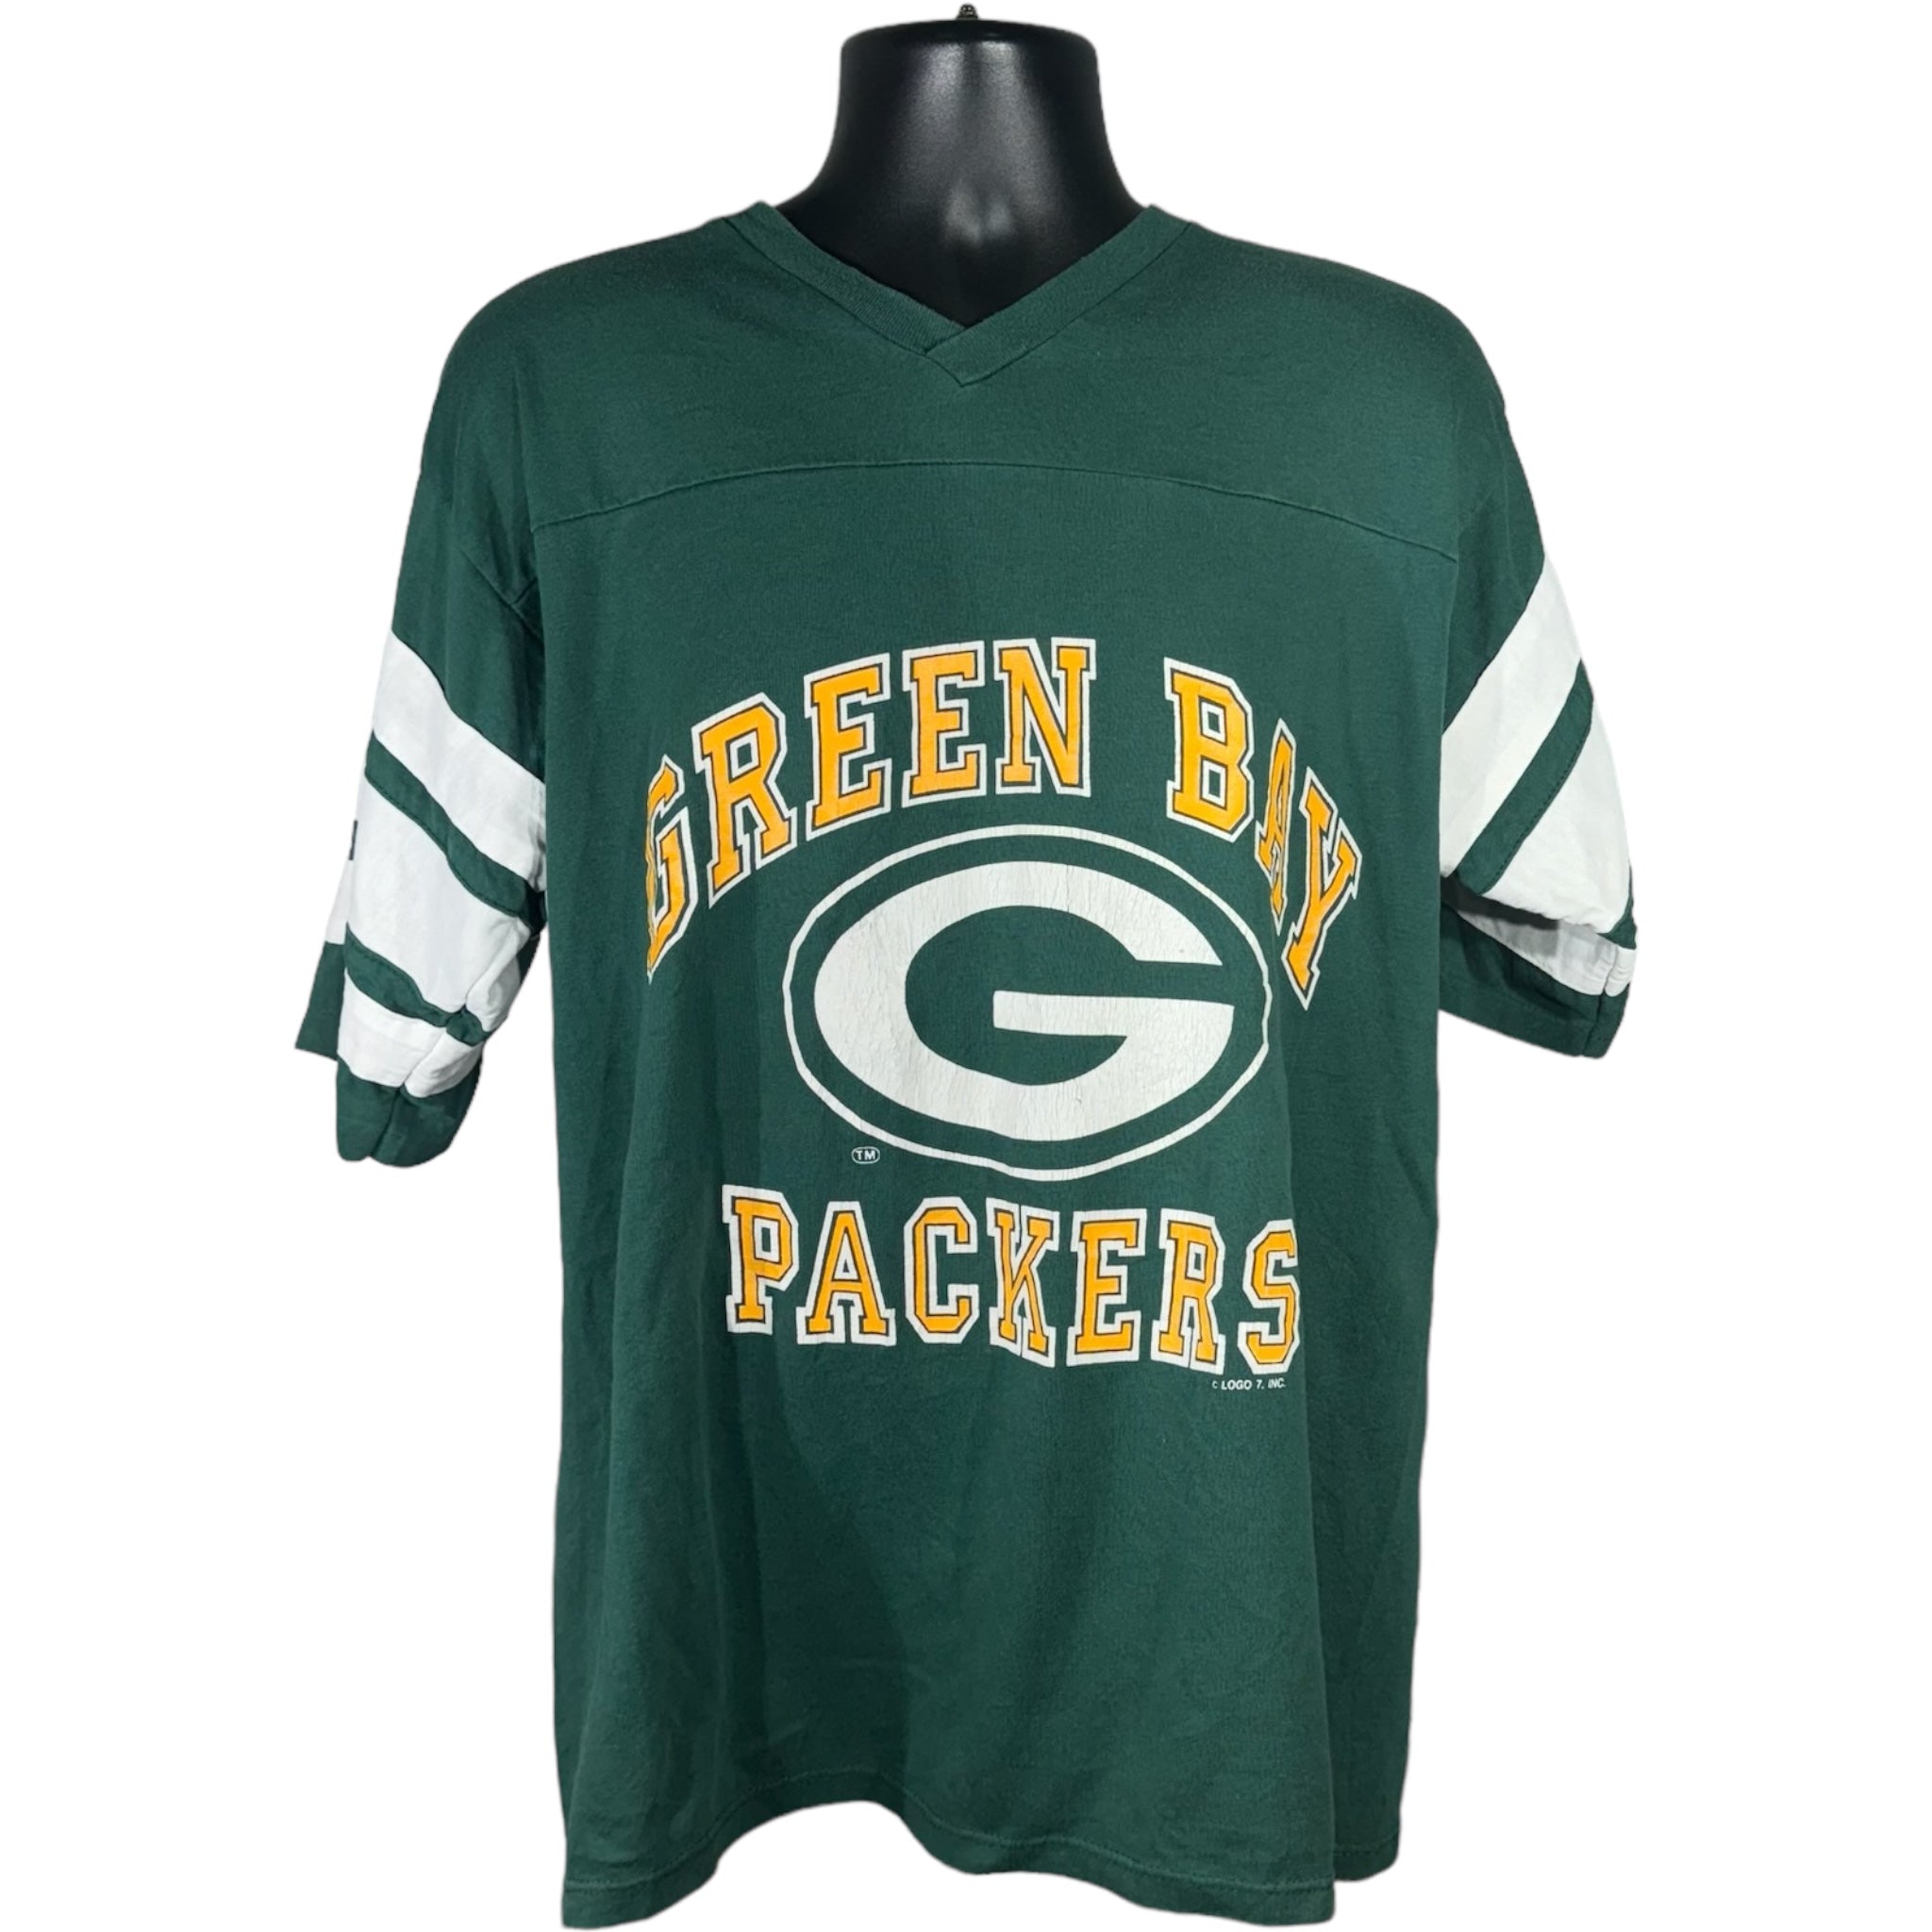 Vintage Green Bay Packers Brian Noble Jersey Tee